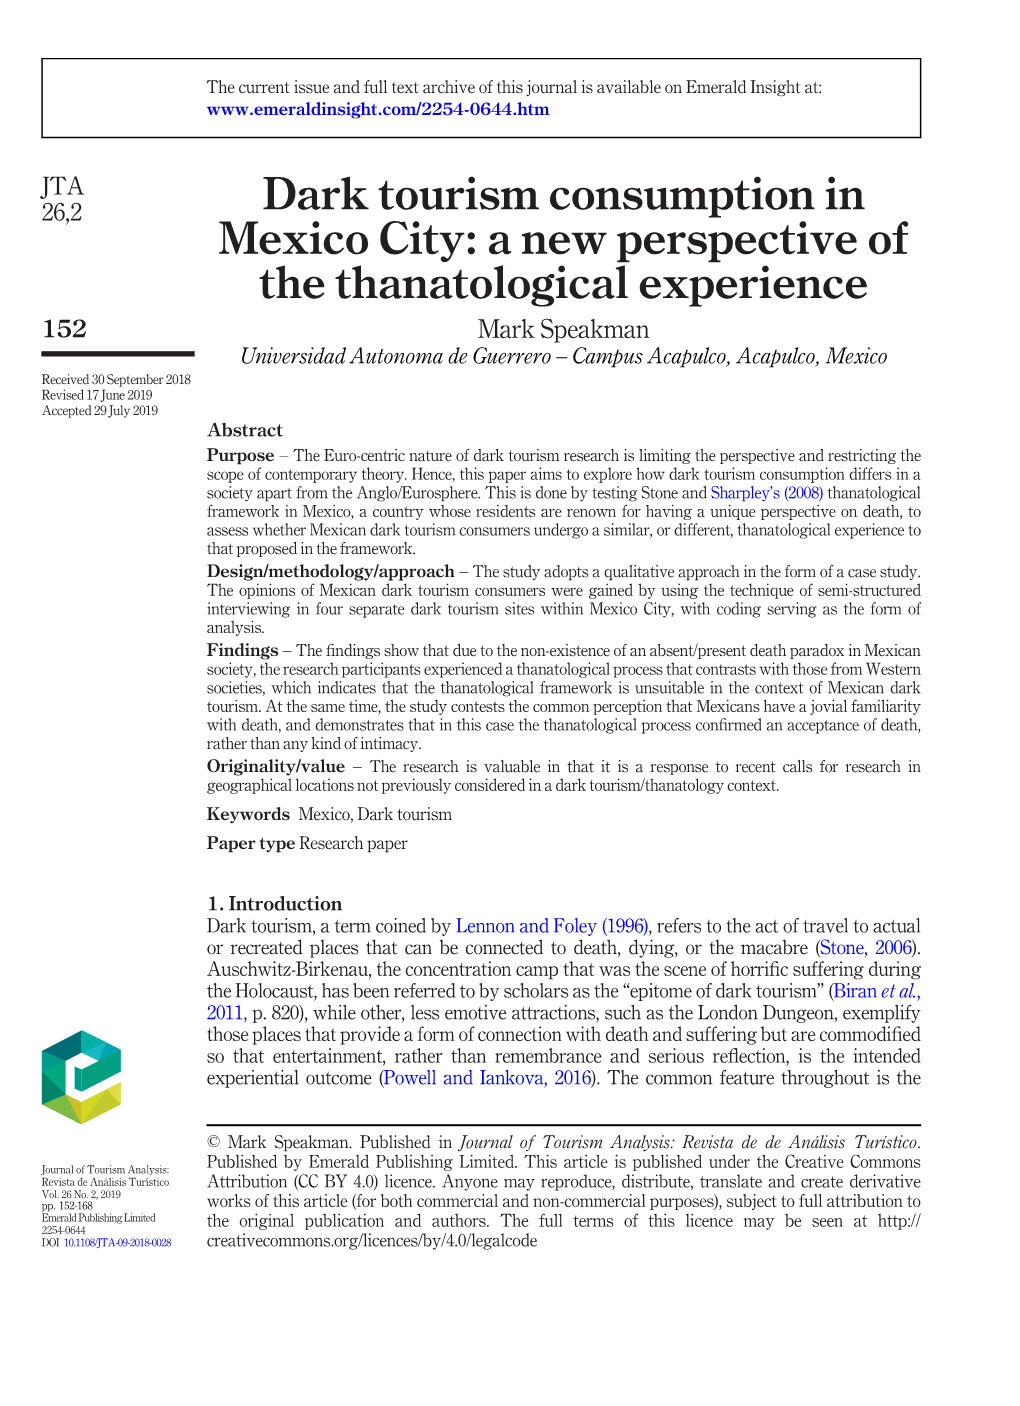 Dark Tourism Consumption in Mexico City: a New Perspective of The